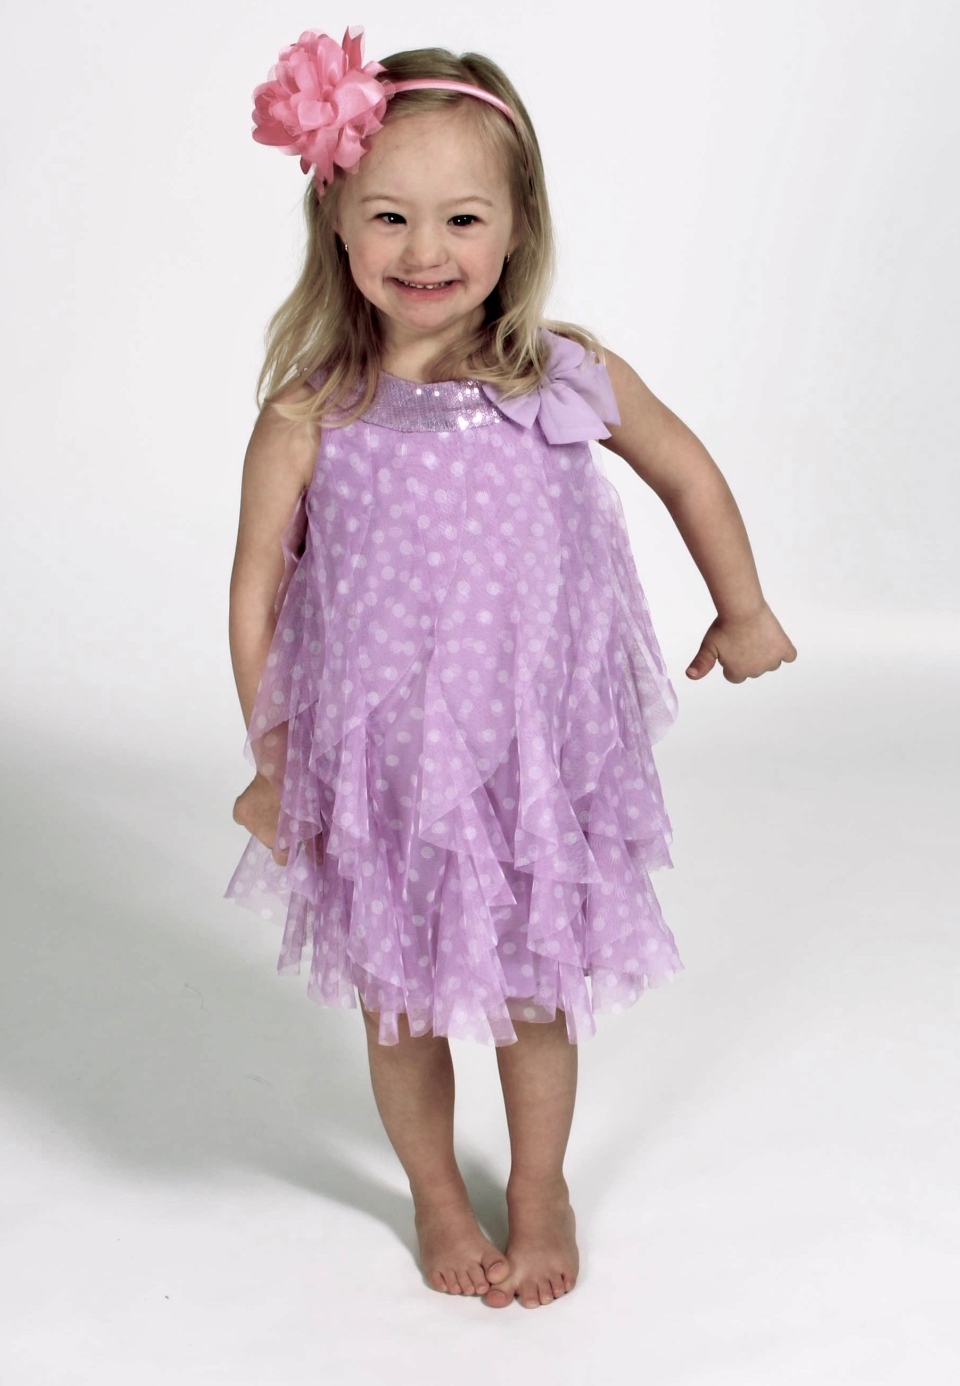 Model with Down syndrome